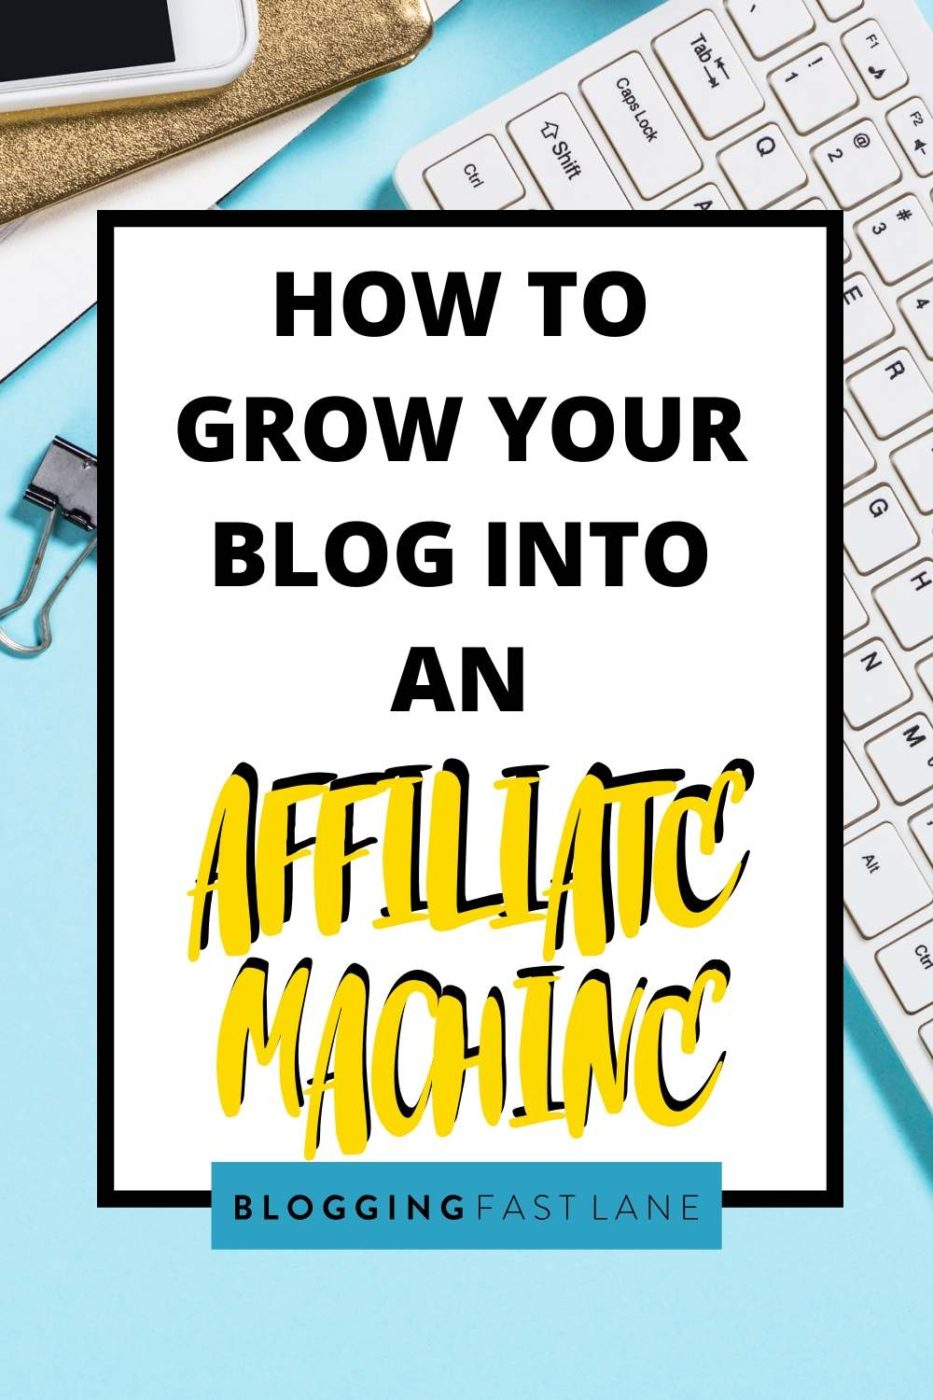 Affiliate Marketing for Bloggers | Learn how to succeed at affiliate marketing by growing your blog into an Affiliate Machine!